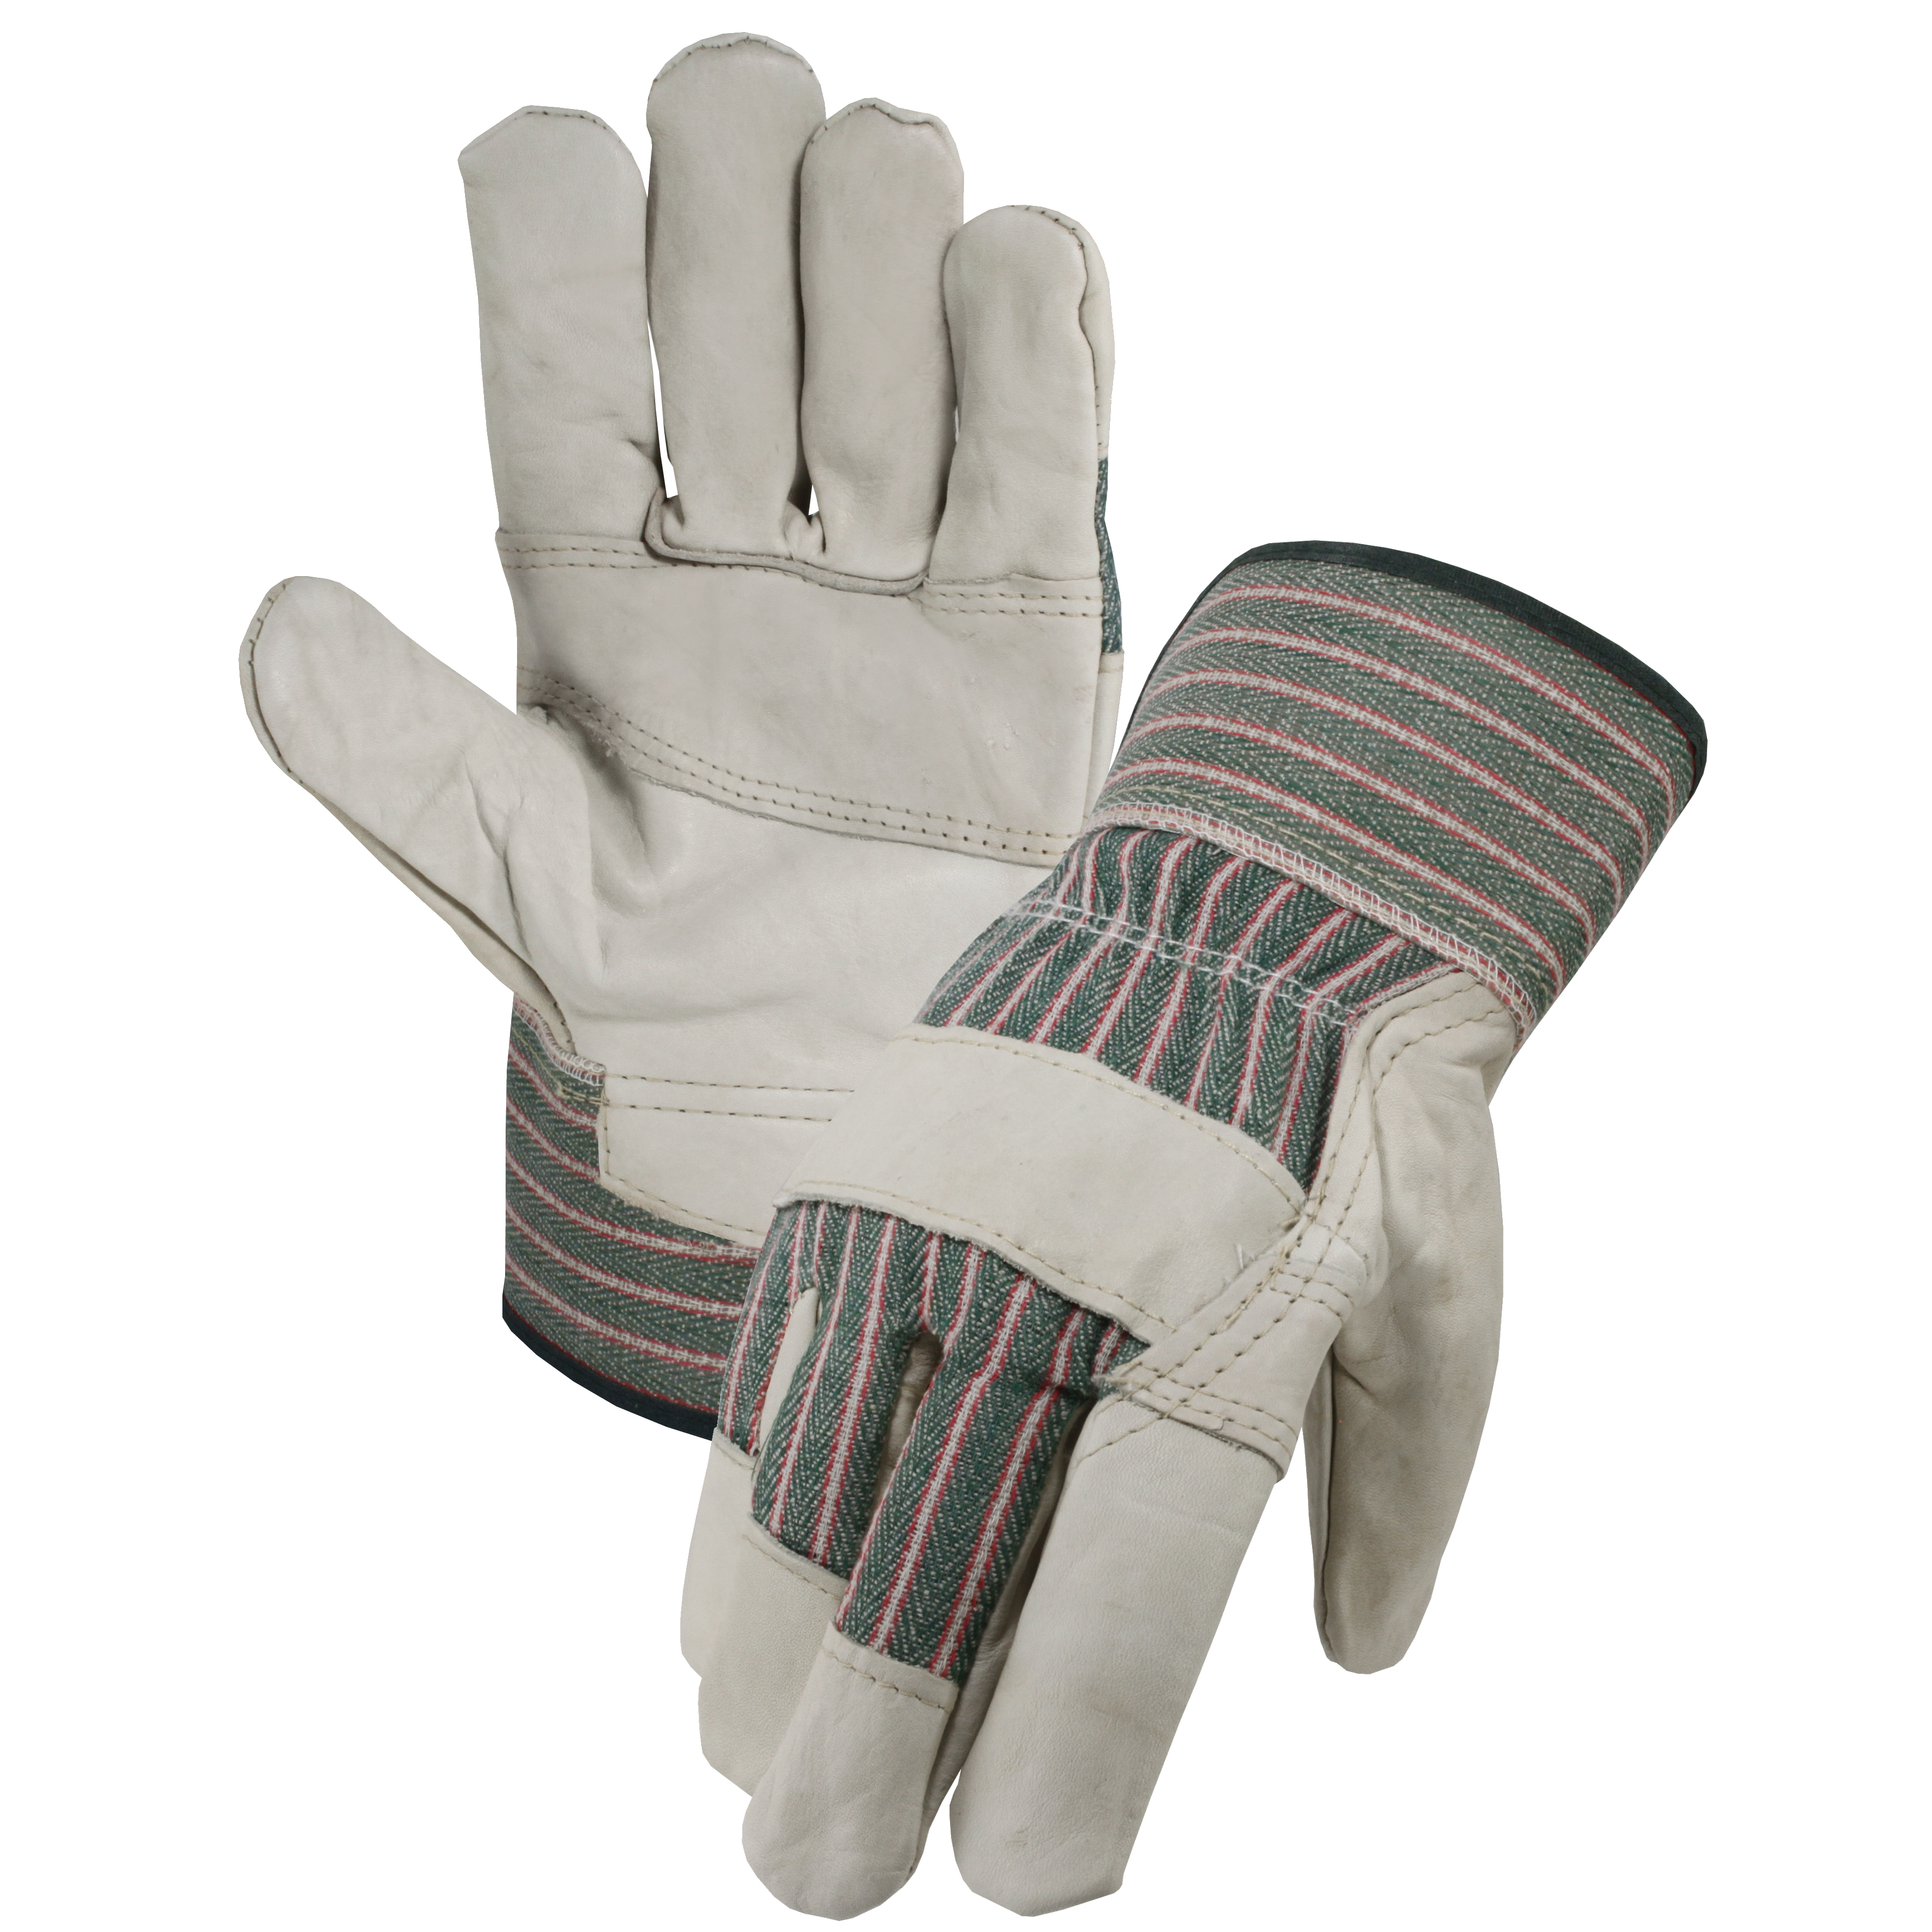 Grain Leather Patch Palm Gloves, 1 Pair